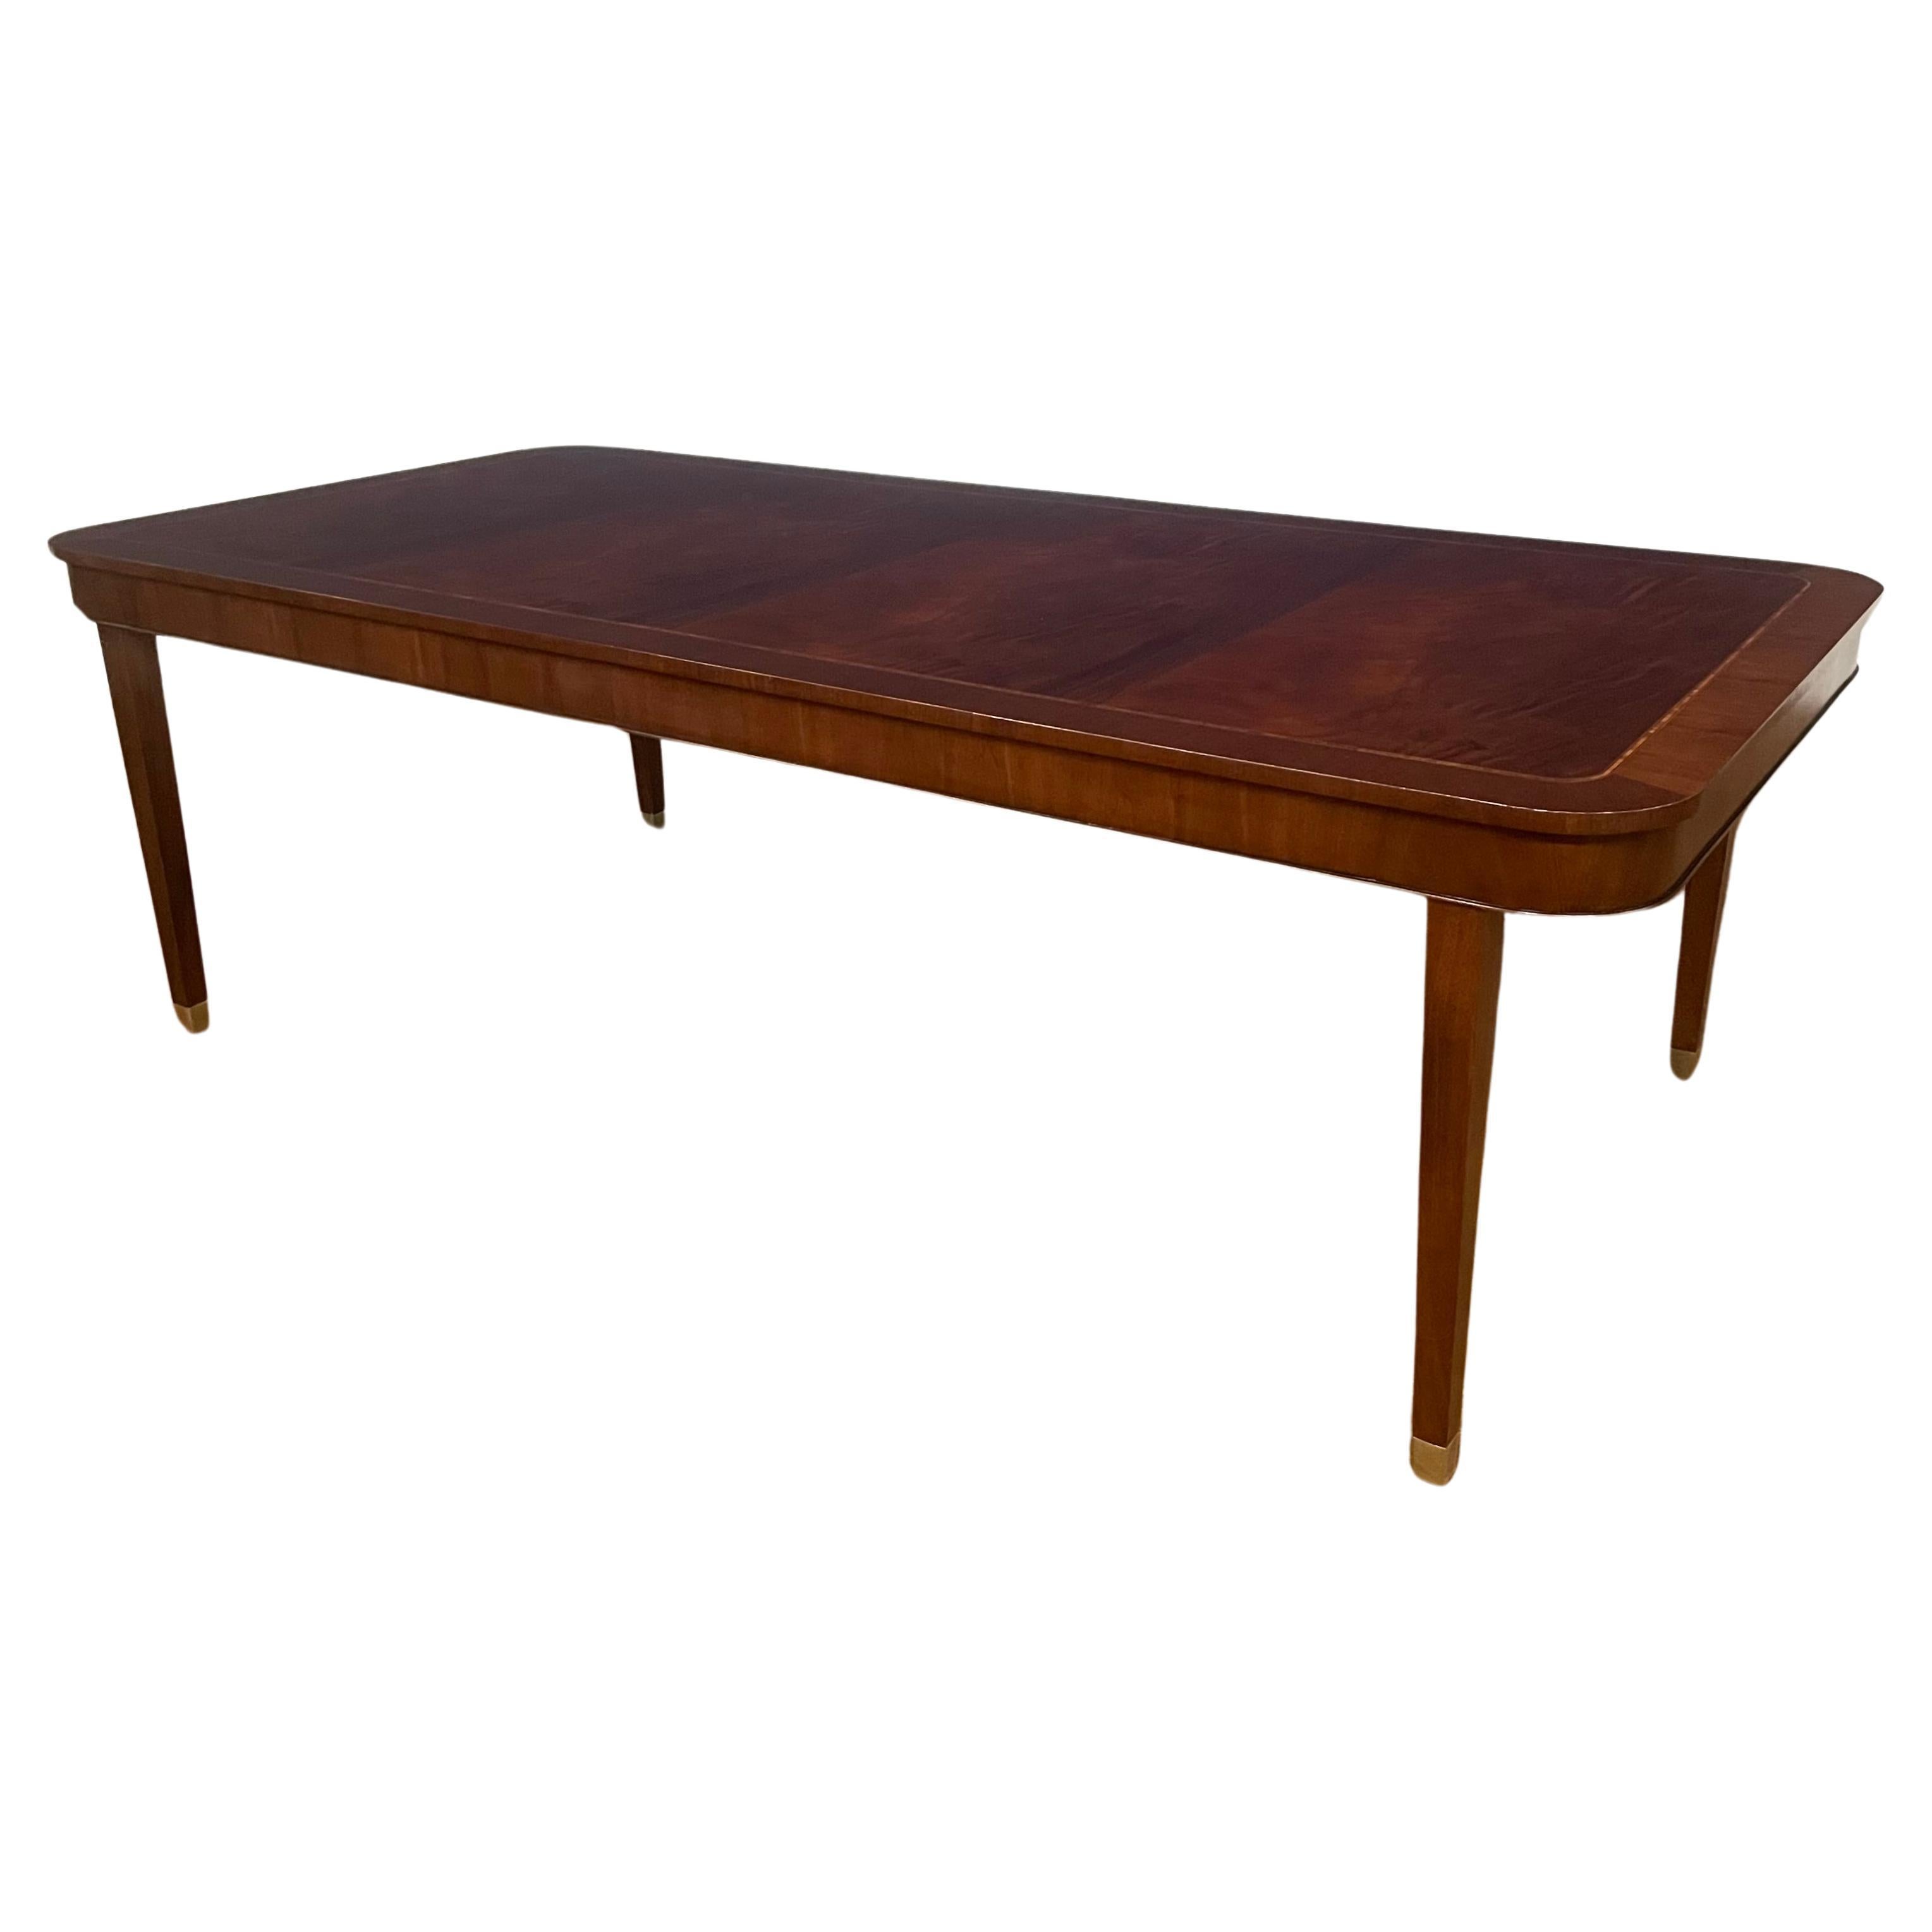 Hepplewhite Style Mahogany Four Leg Dining Table - Made-To-Order 